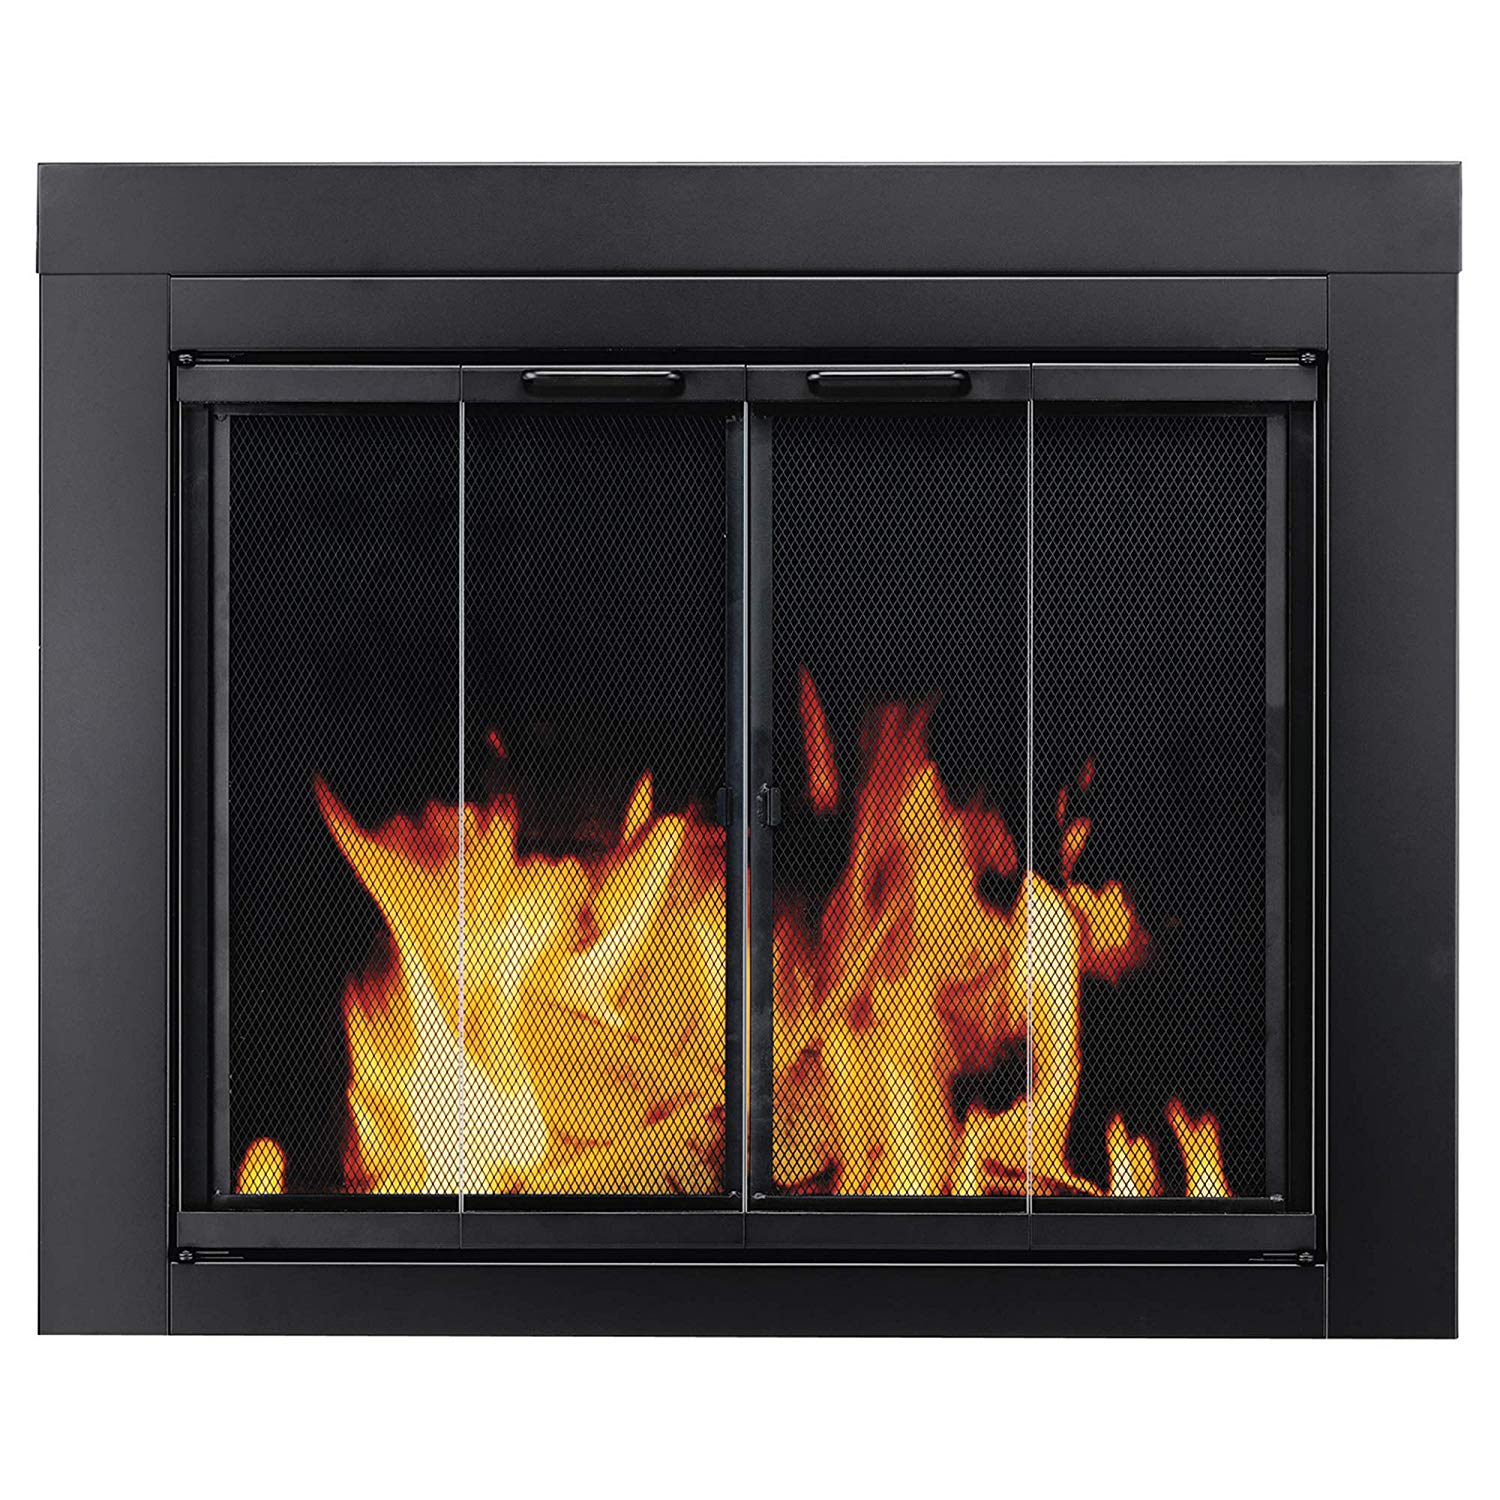 Fireplace Wood for Sale Beautiful Pleasant Hearth at 1000 ascot Fireplace Glass Door Black Small